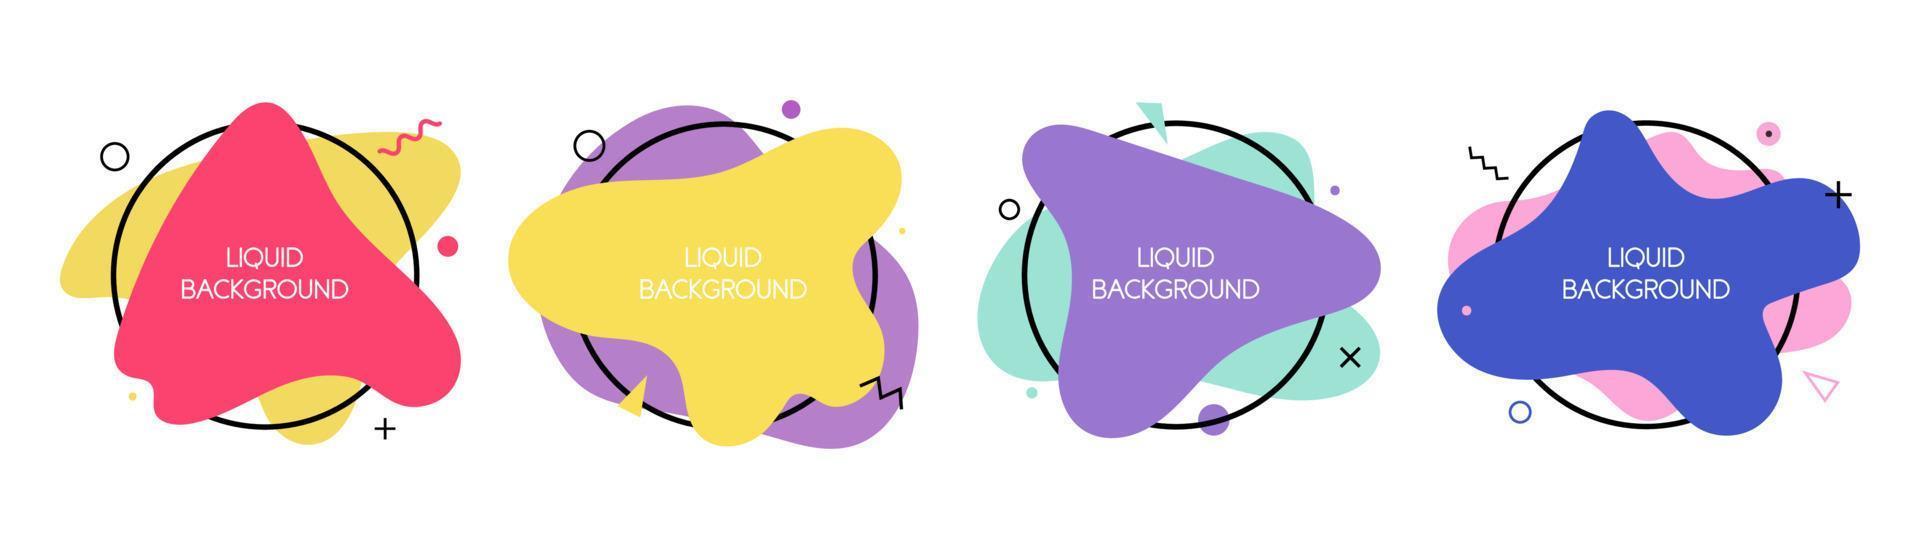 Set of 4 abstract graphic liquid elements in memphis style. Dynamical waves colored fluid shapes. Isolated banners with flowing liquids. Template for the design of a logo, flyer or presentation. vector